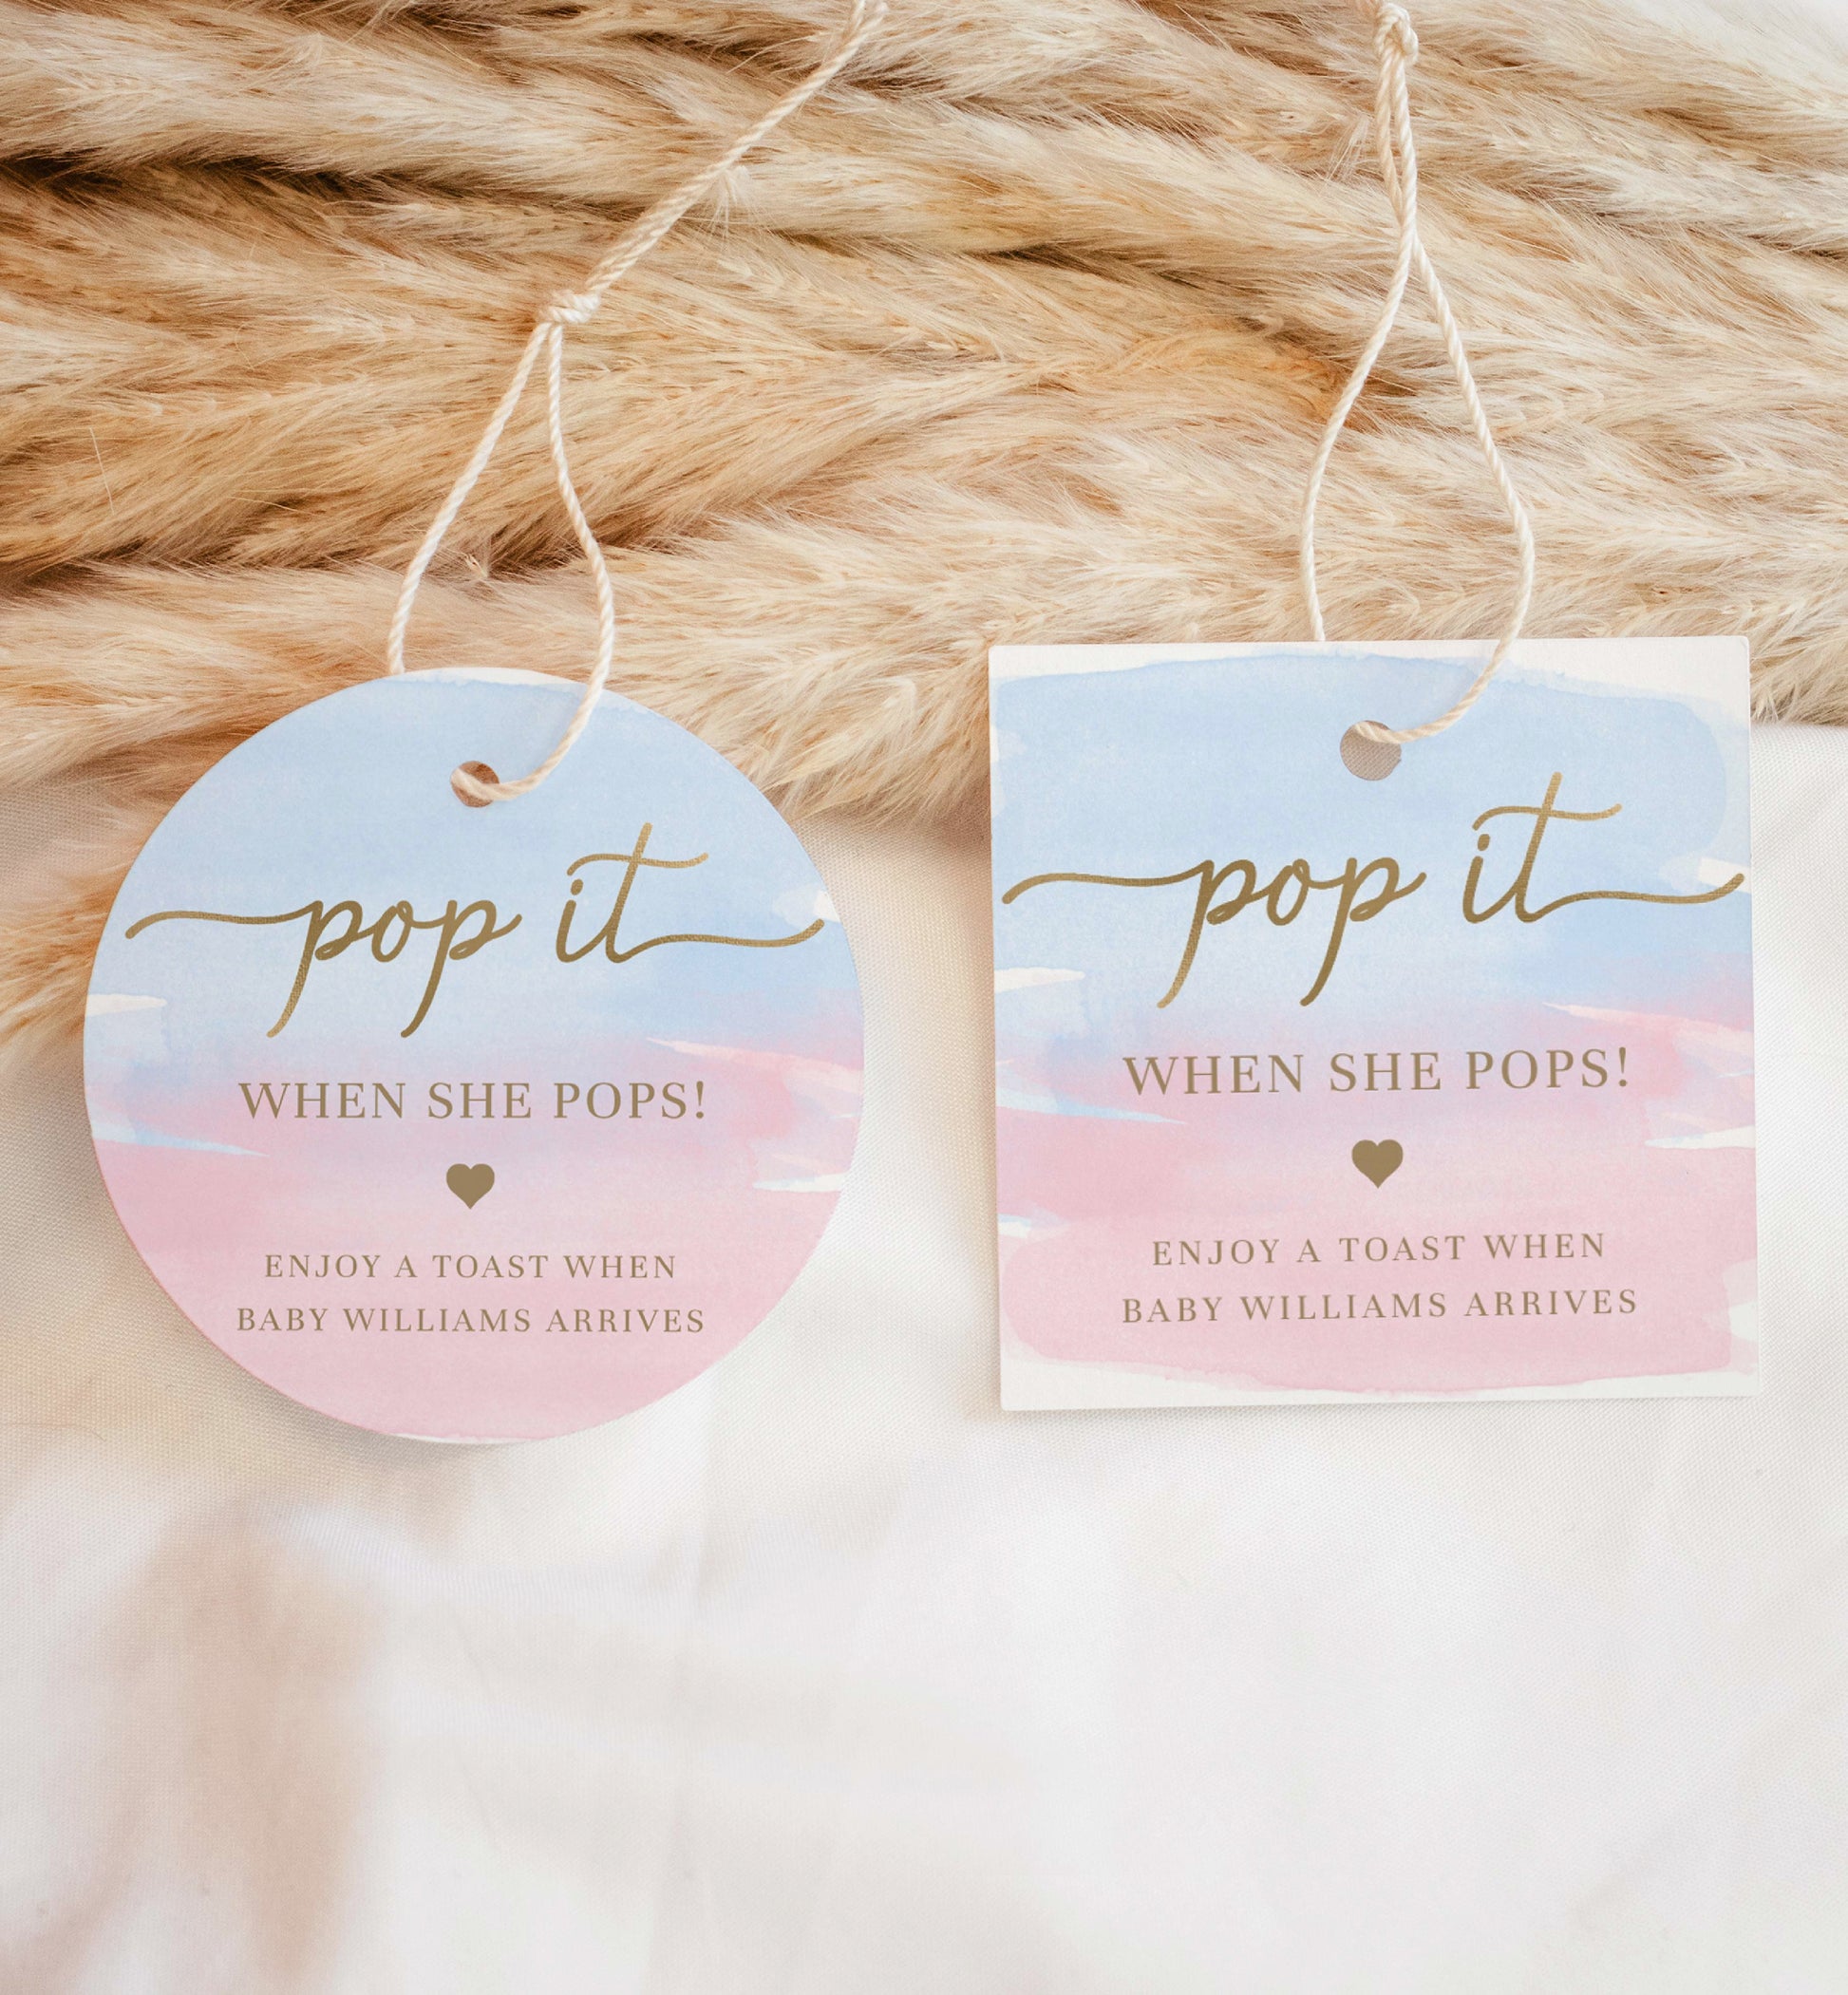 Pop It When She Pops Favor Tag and Label, Gender Reveal Baby Shower Champagne Pop It Favor Tag, Pink Blue Watercolor Mini Wine Bottle Label